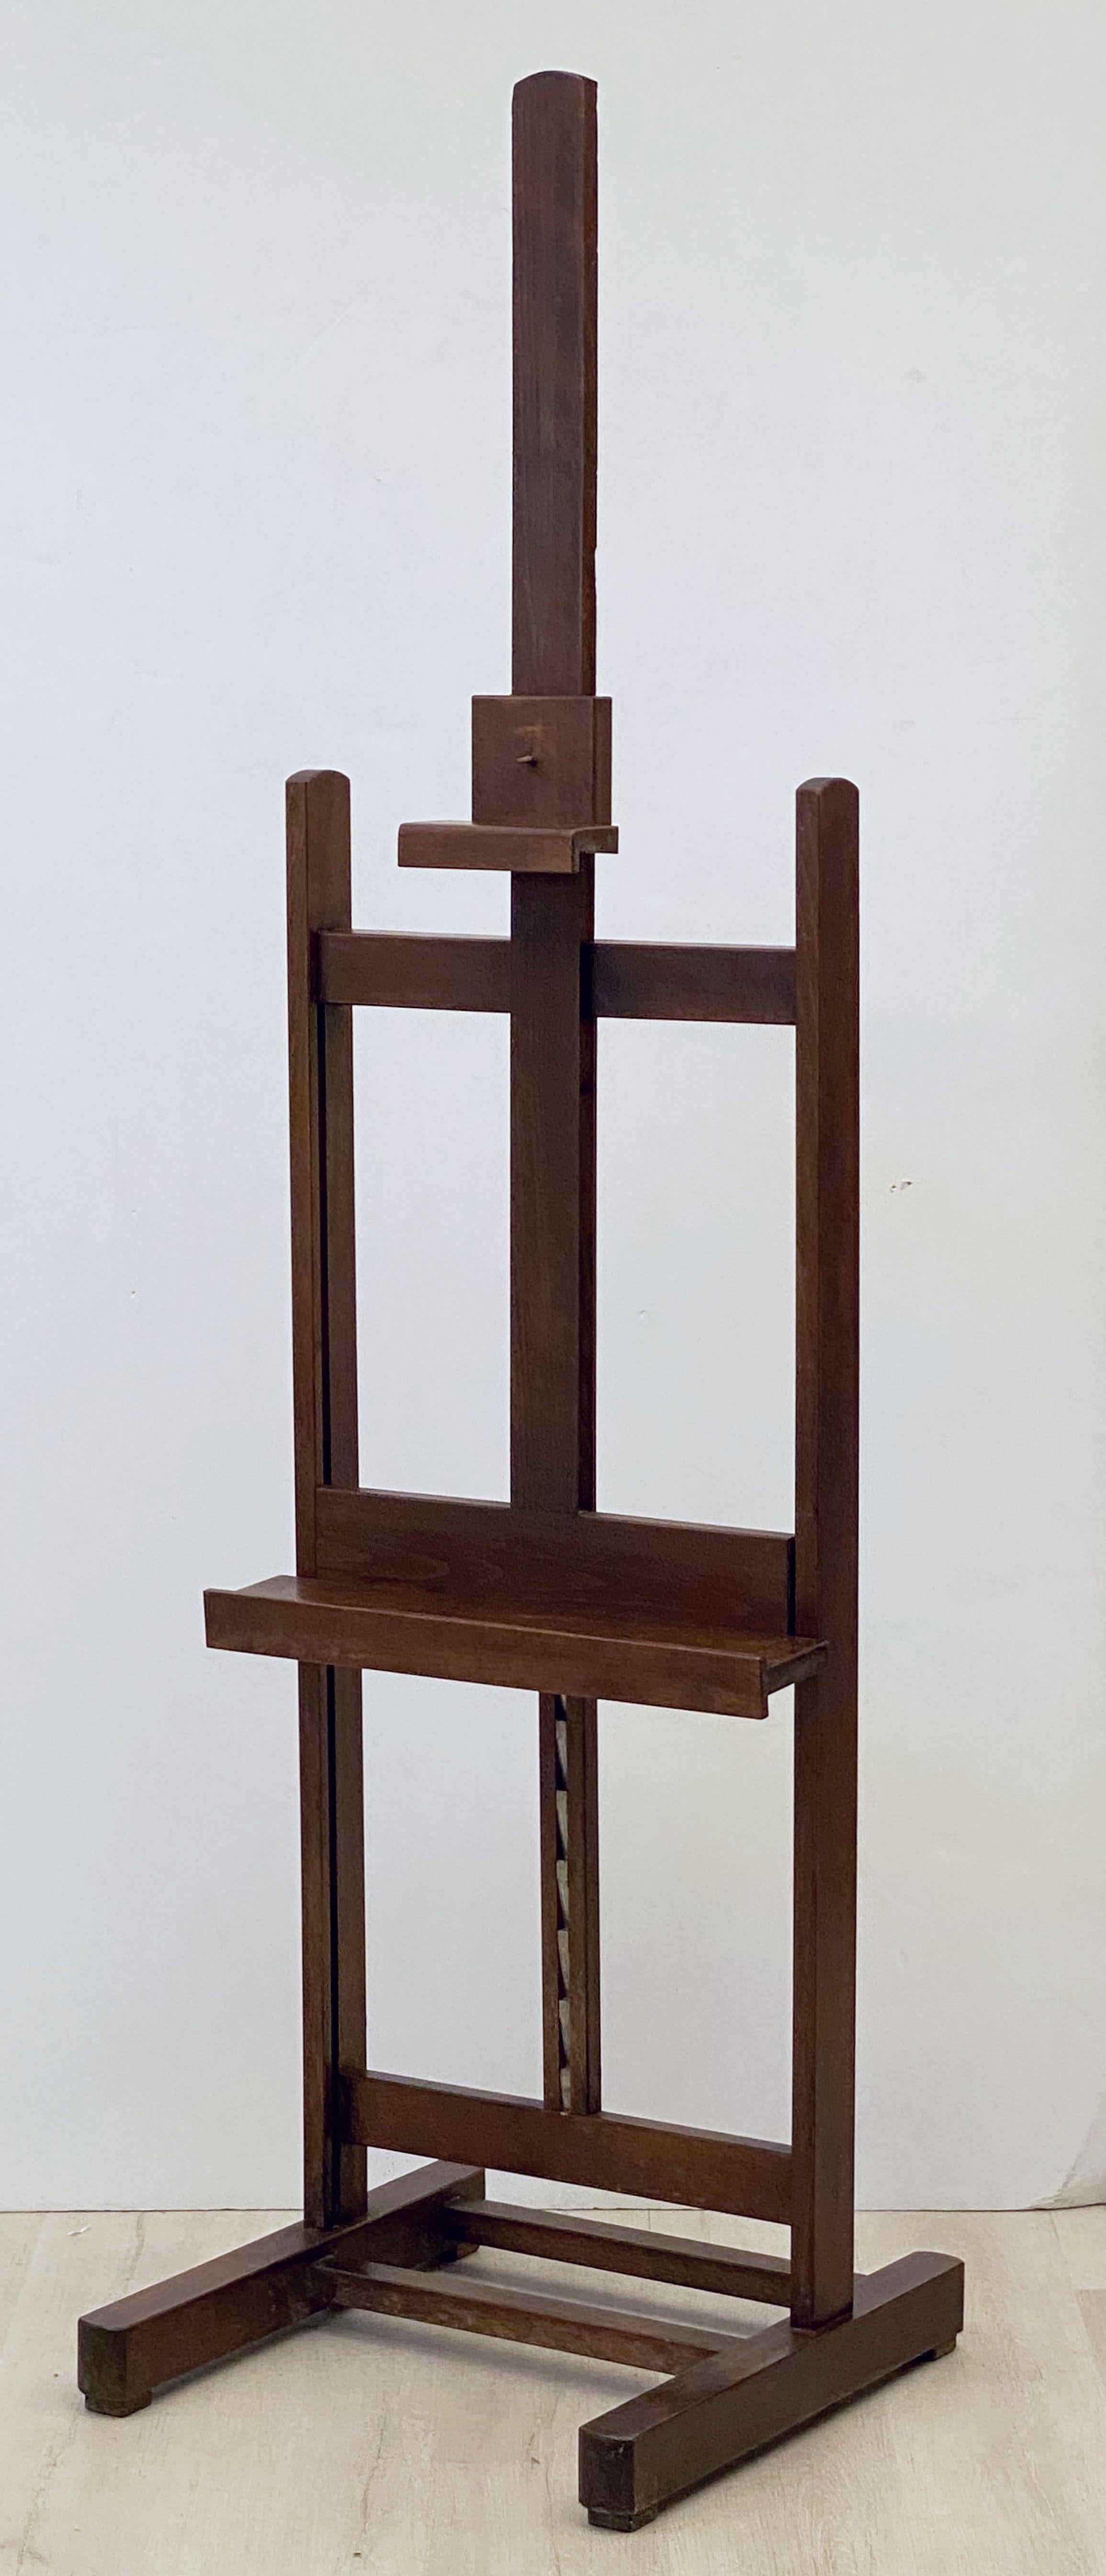 A handsome English artist's display or studio floor easel from the early 20th century, featuring a spring latch to adjust the tray height, solid beam construction, on rolling casters.

This sturdy easel can handle large canvases or function as an